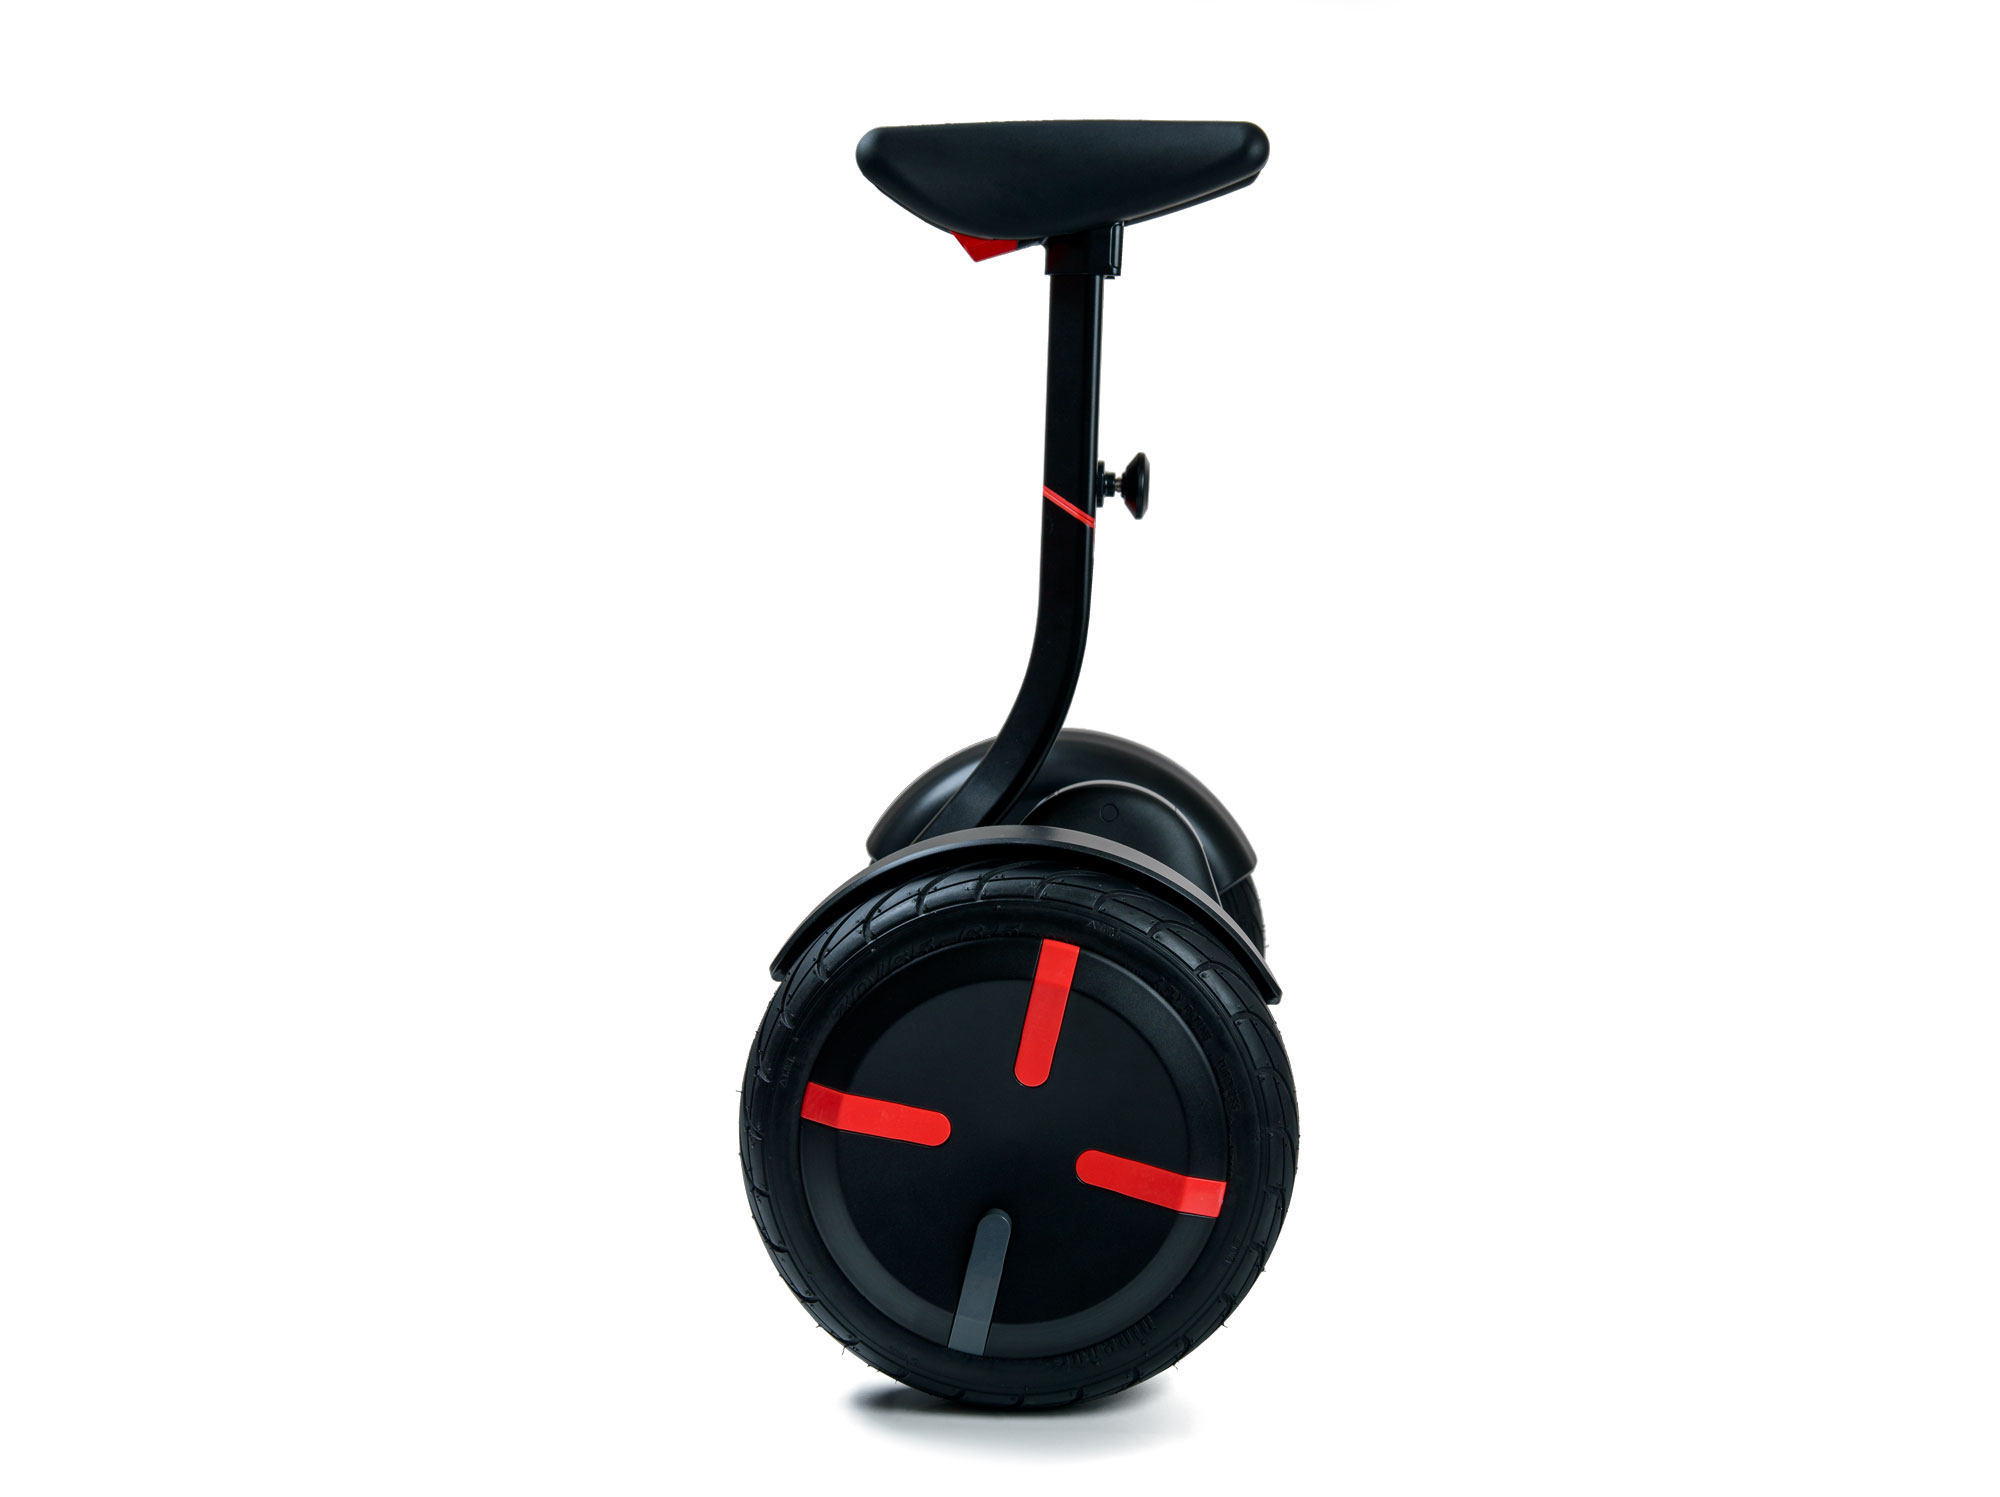 Segway miniPRO Smart Self Balancing Personal Transporter with Mobile App Control 12+ mile range and 260 Watt Hours - image 2 of 4